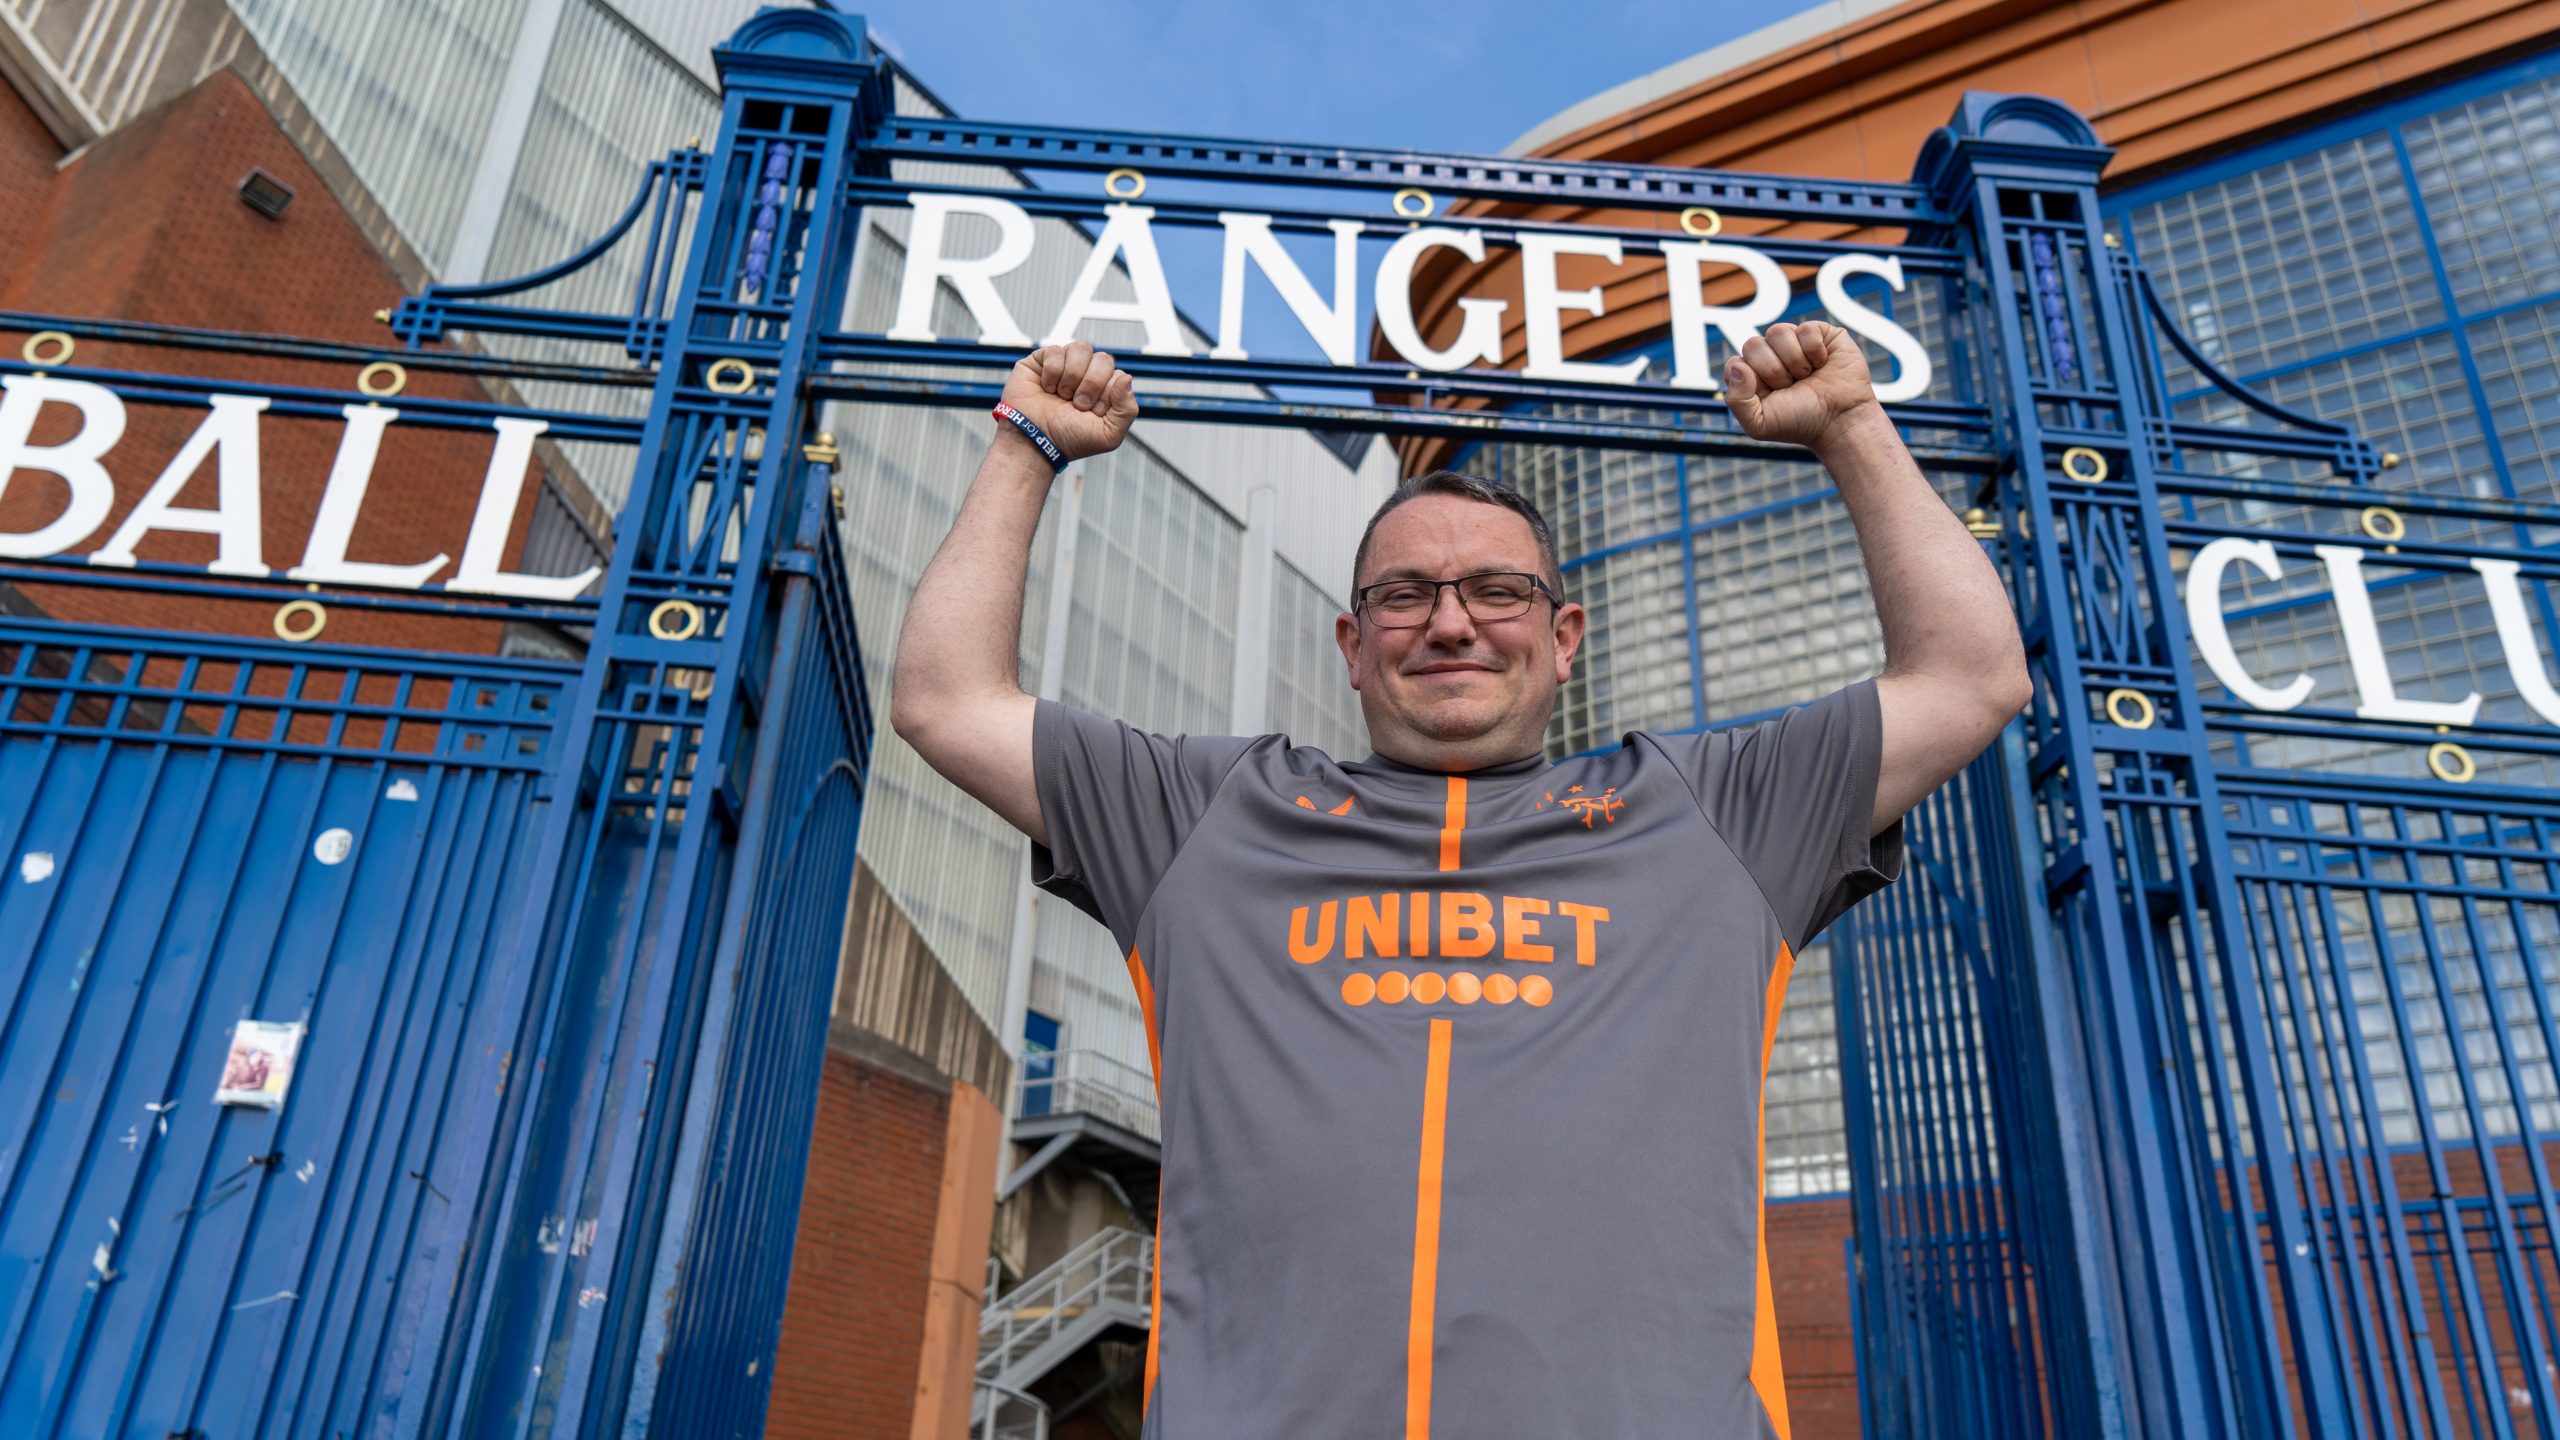 man standing under gate with words Rangers above